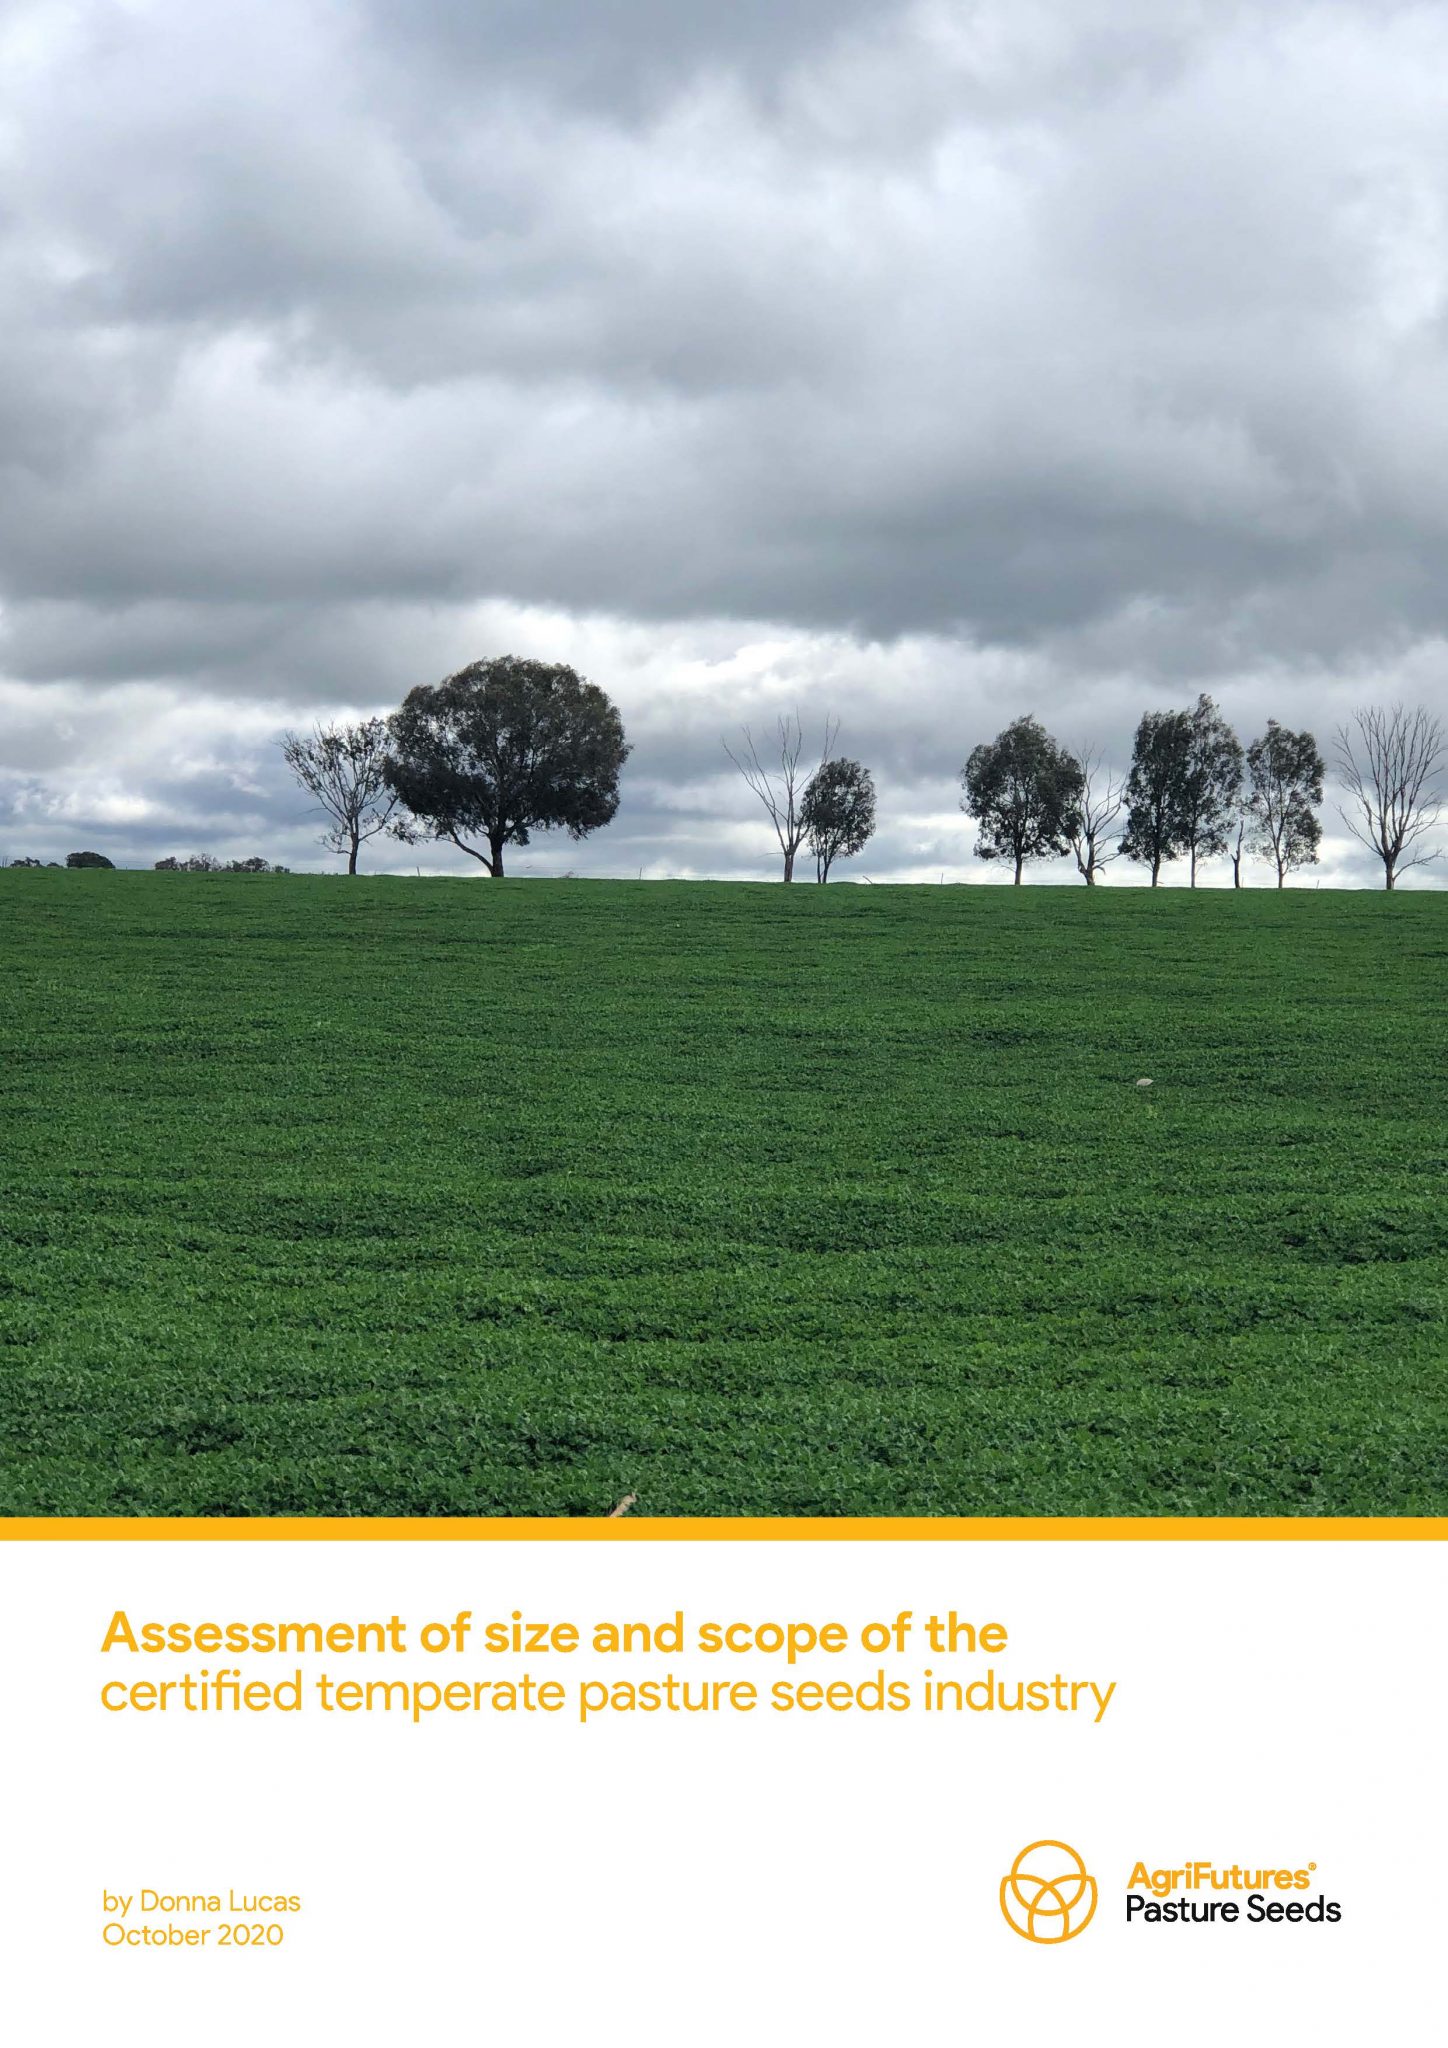 Assessment of size and scope of the certified temperate pasture seeds industry - image